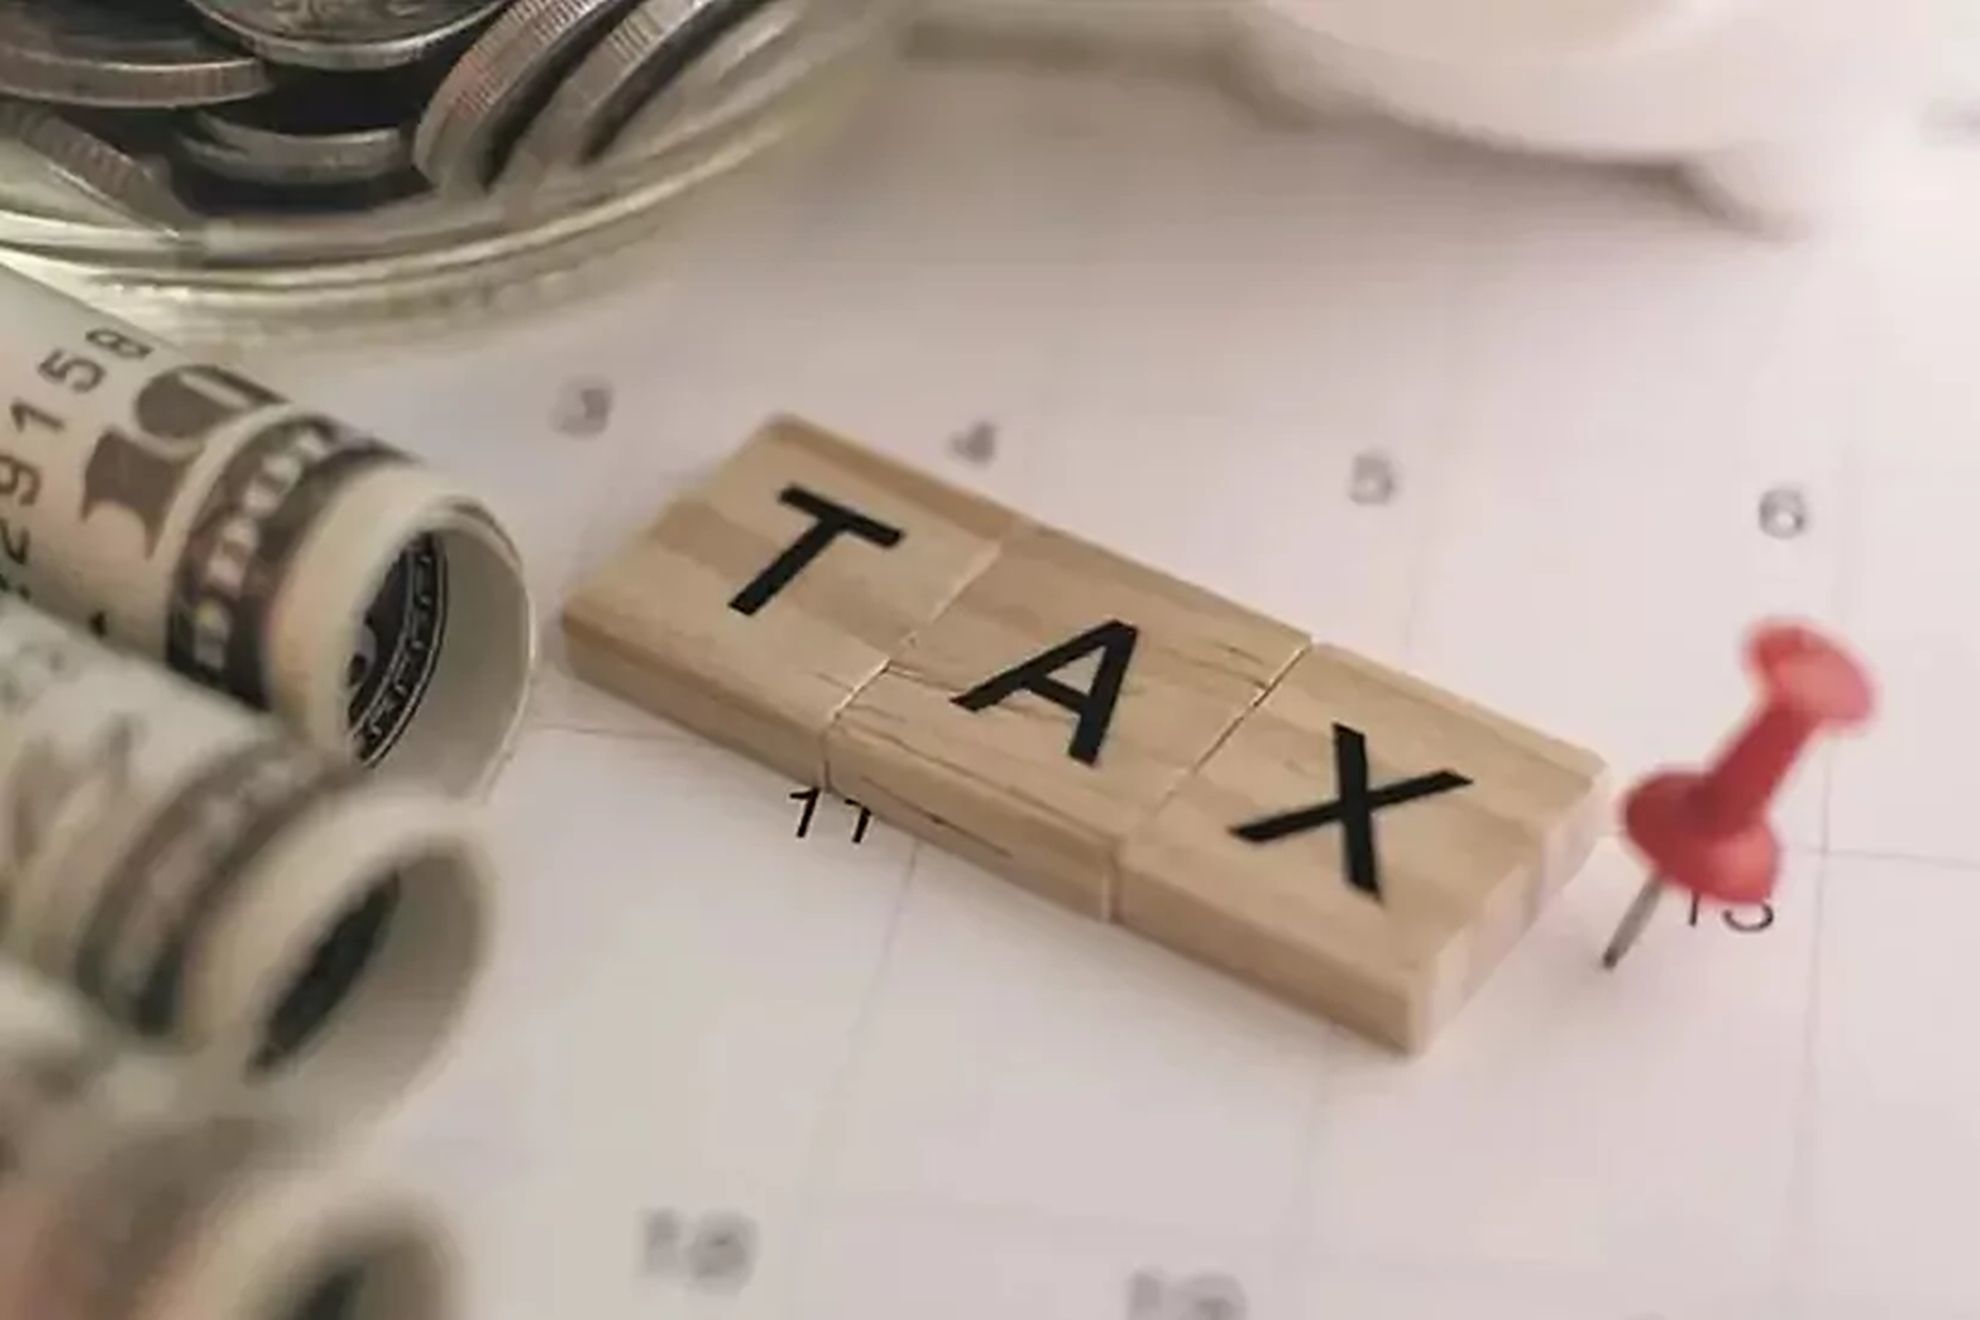 California State Tax Returns: When is the last day to make your payments in California?